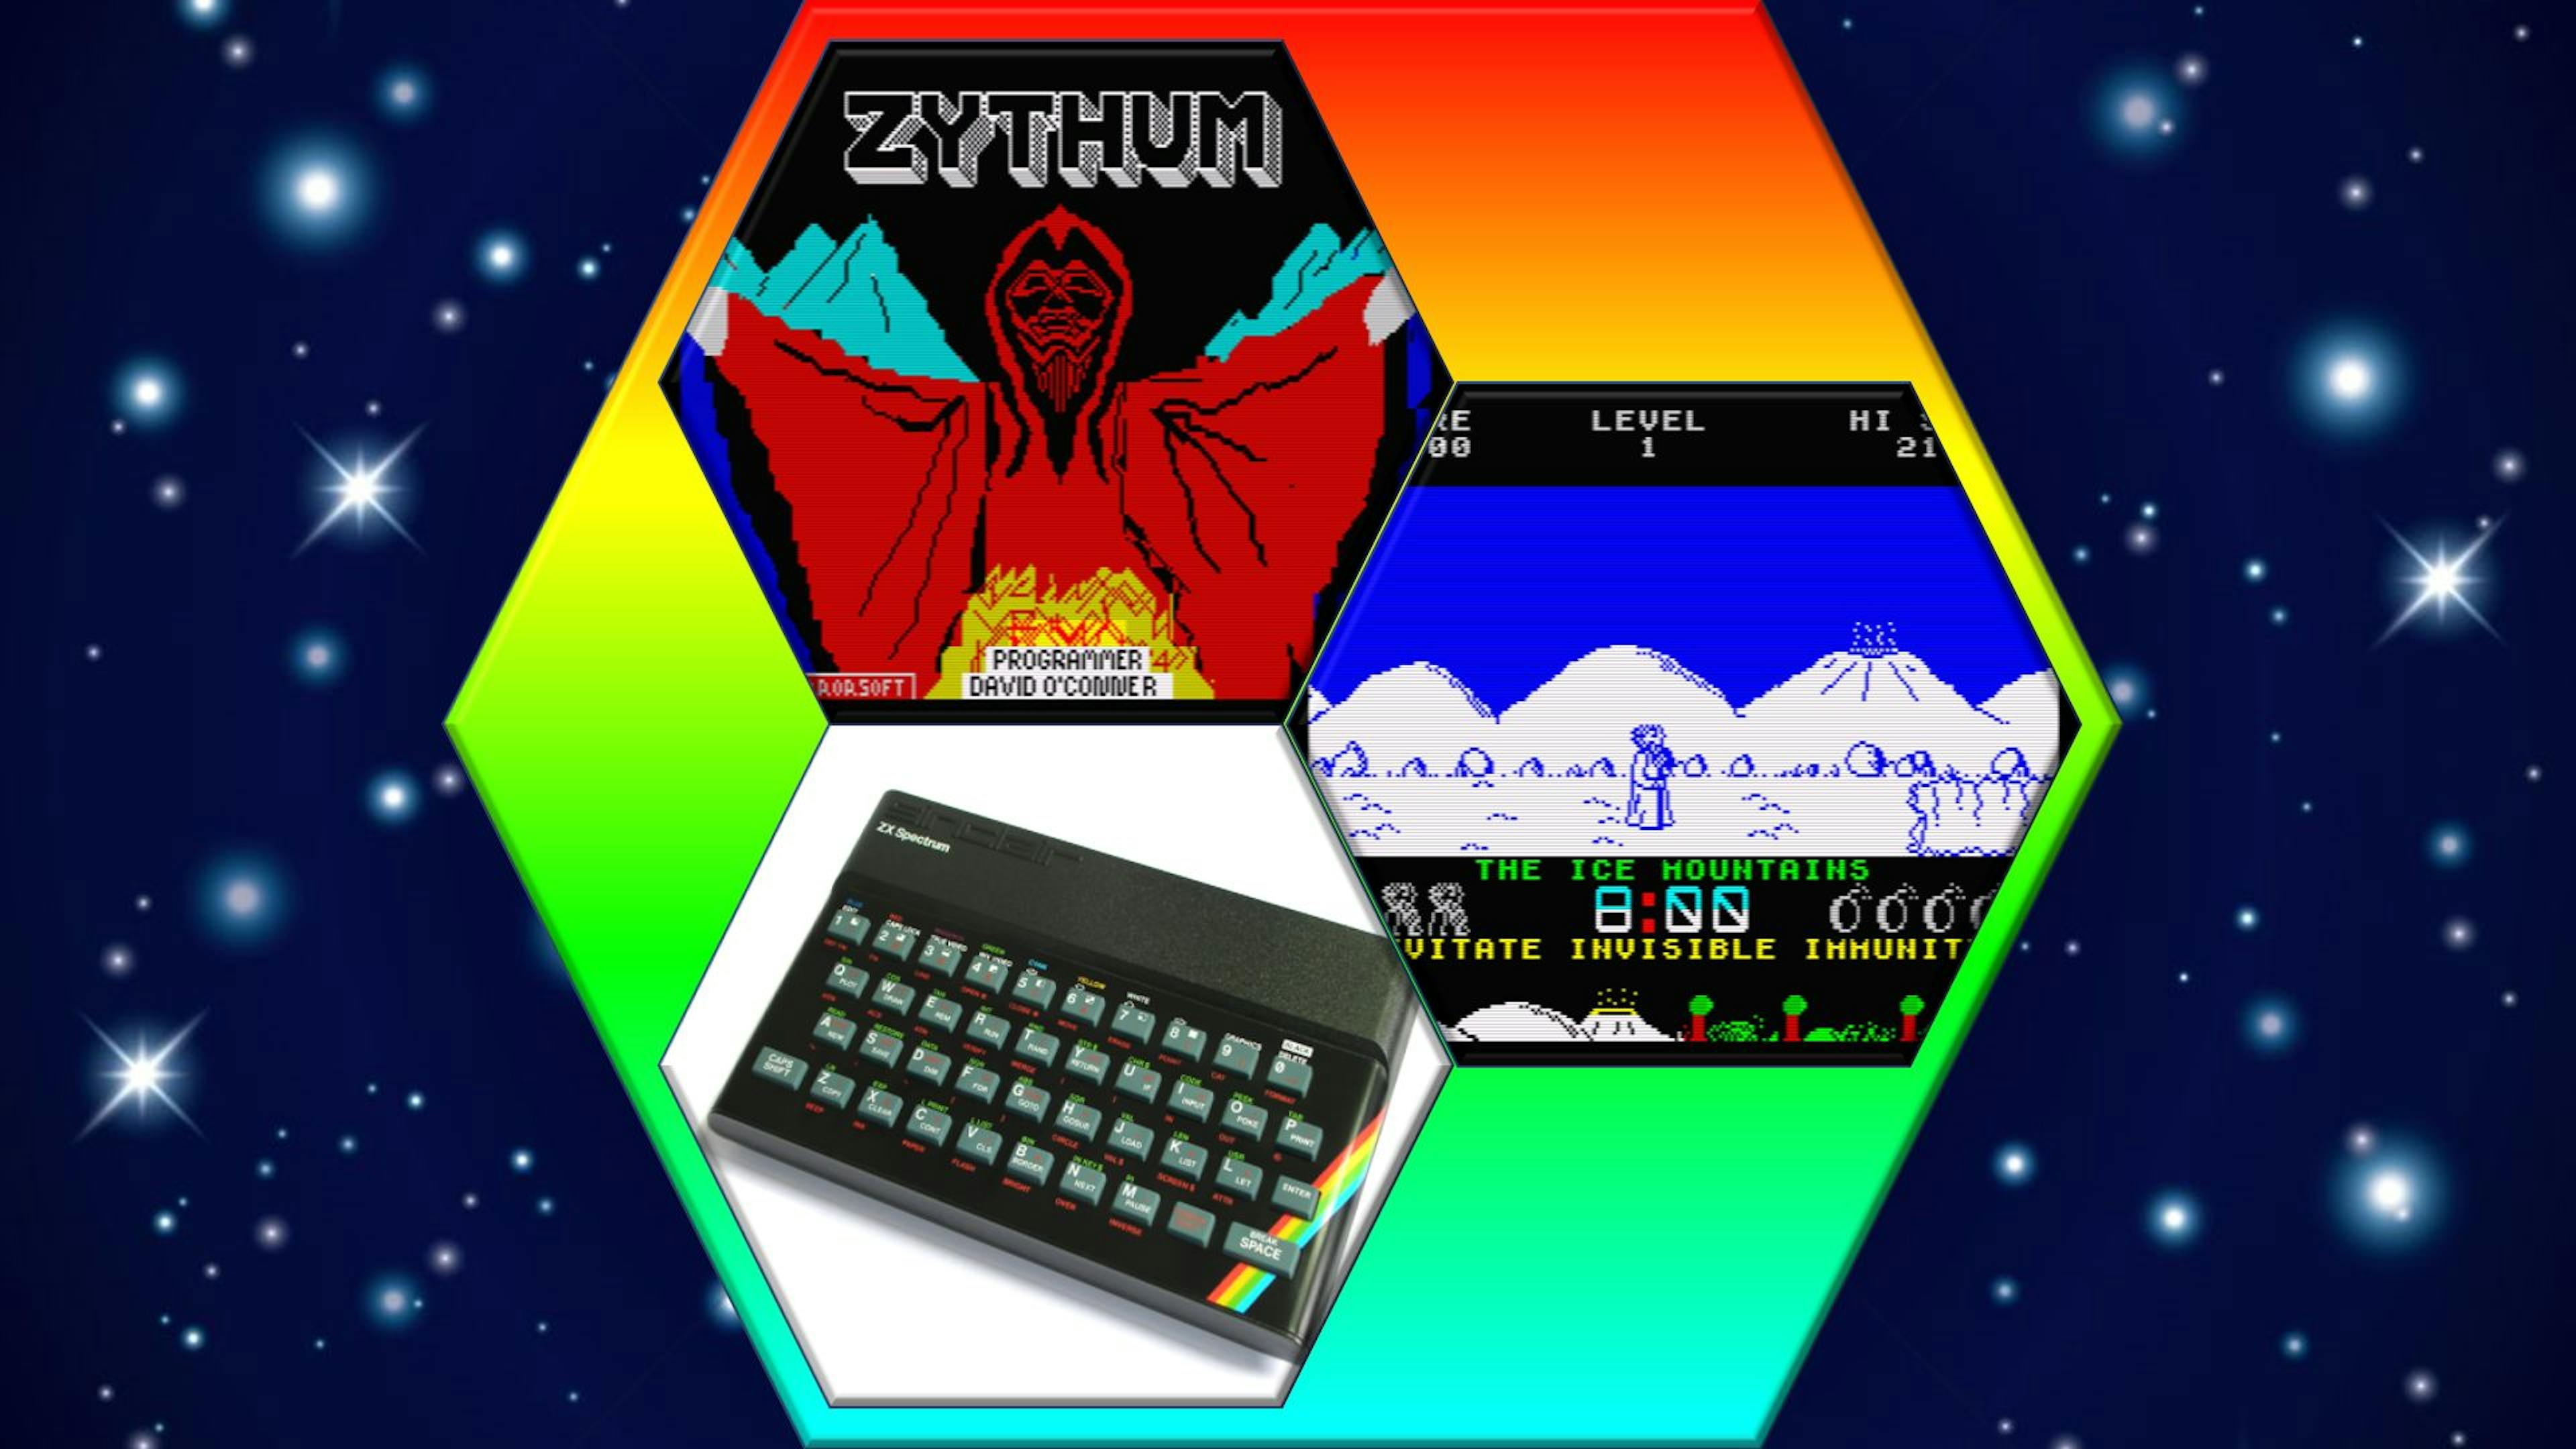 featured image - Zythum (ZX Spectrum) Retro Game Review